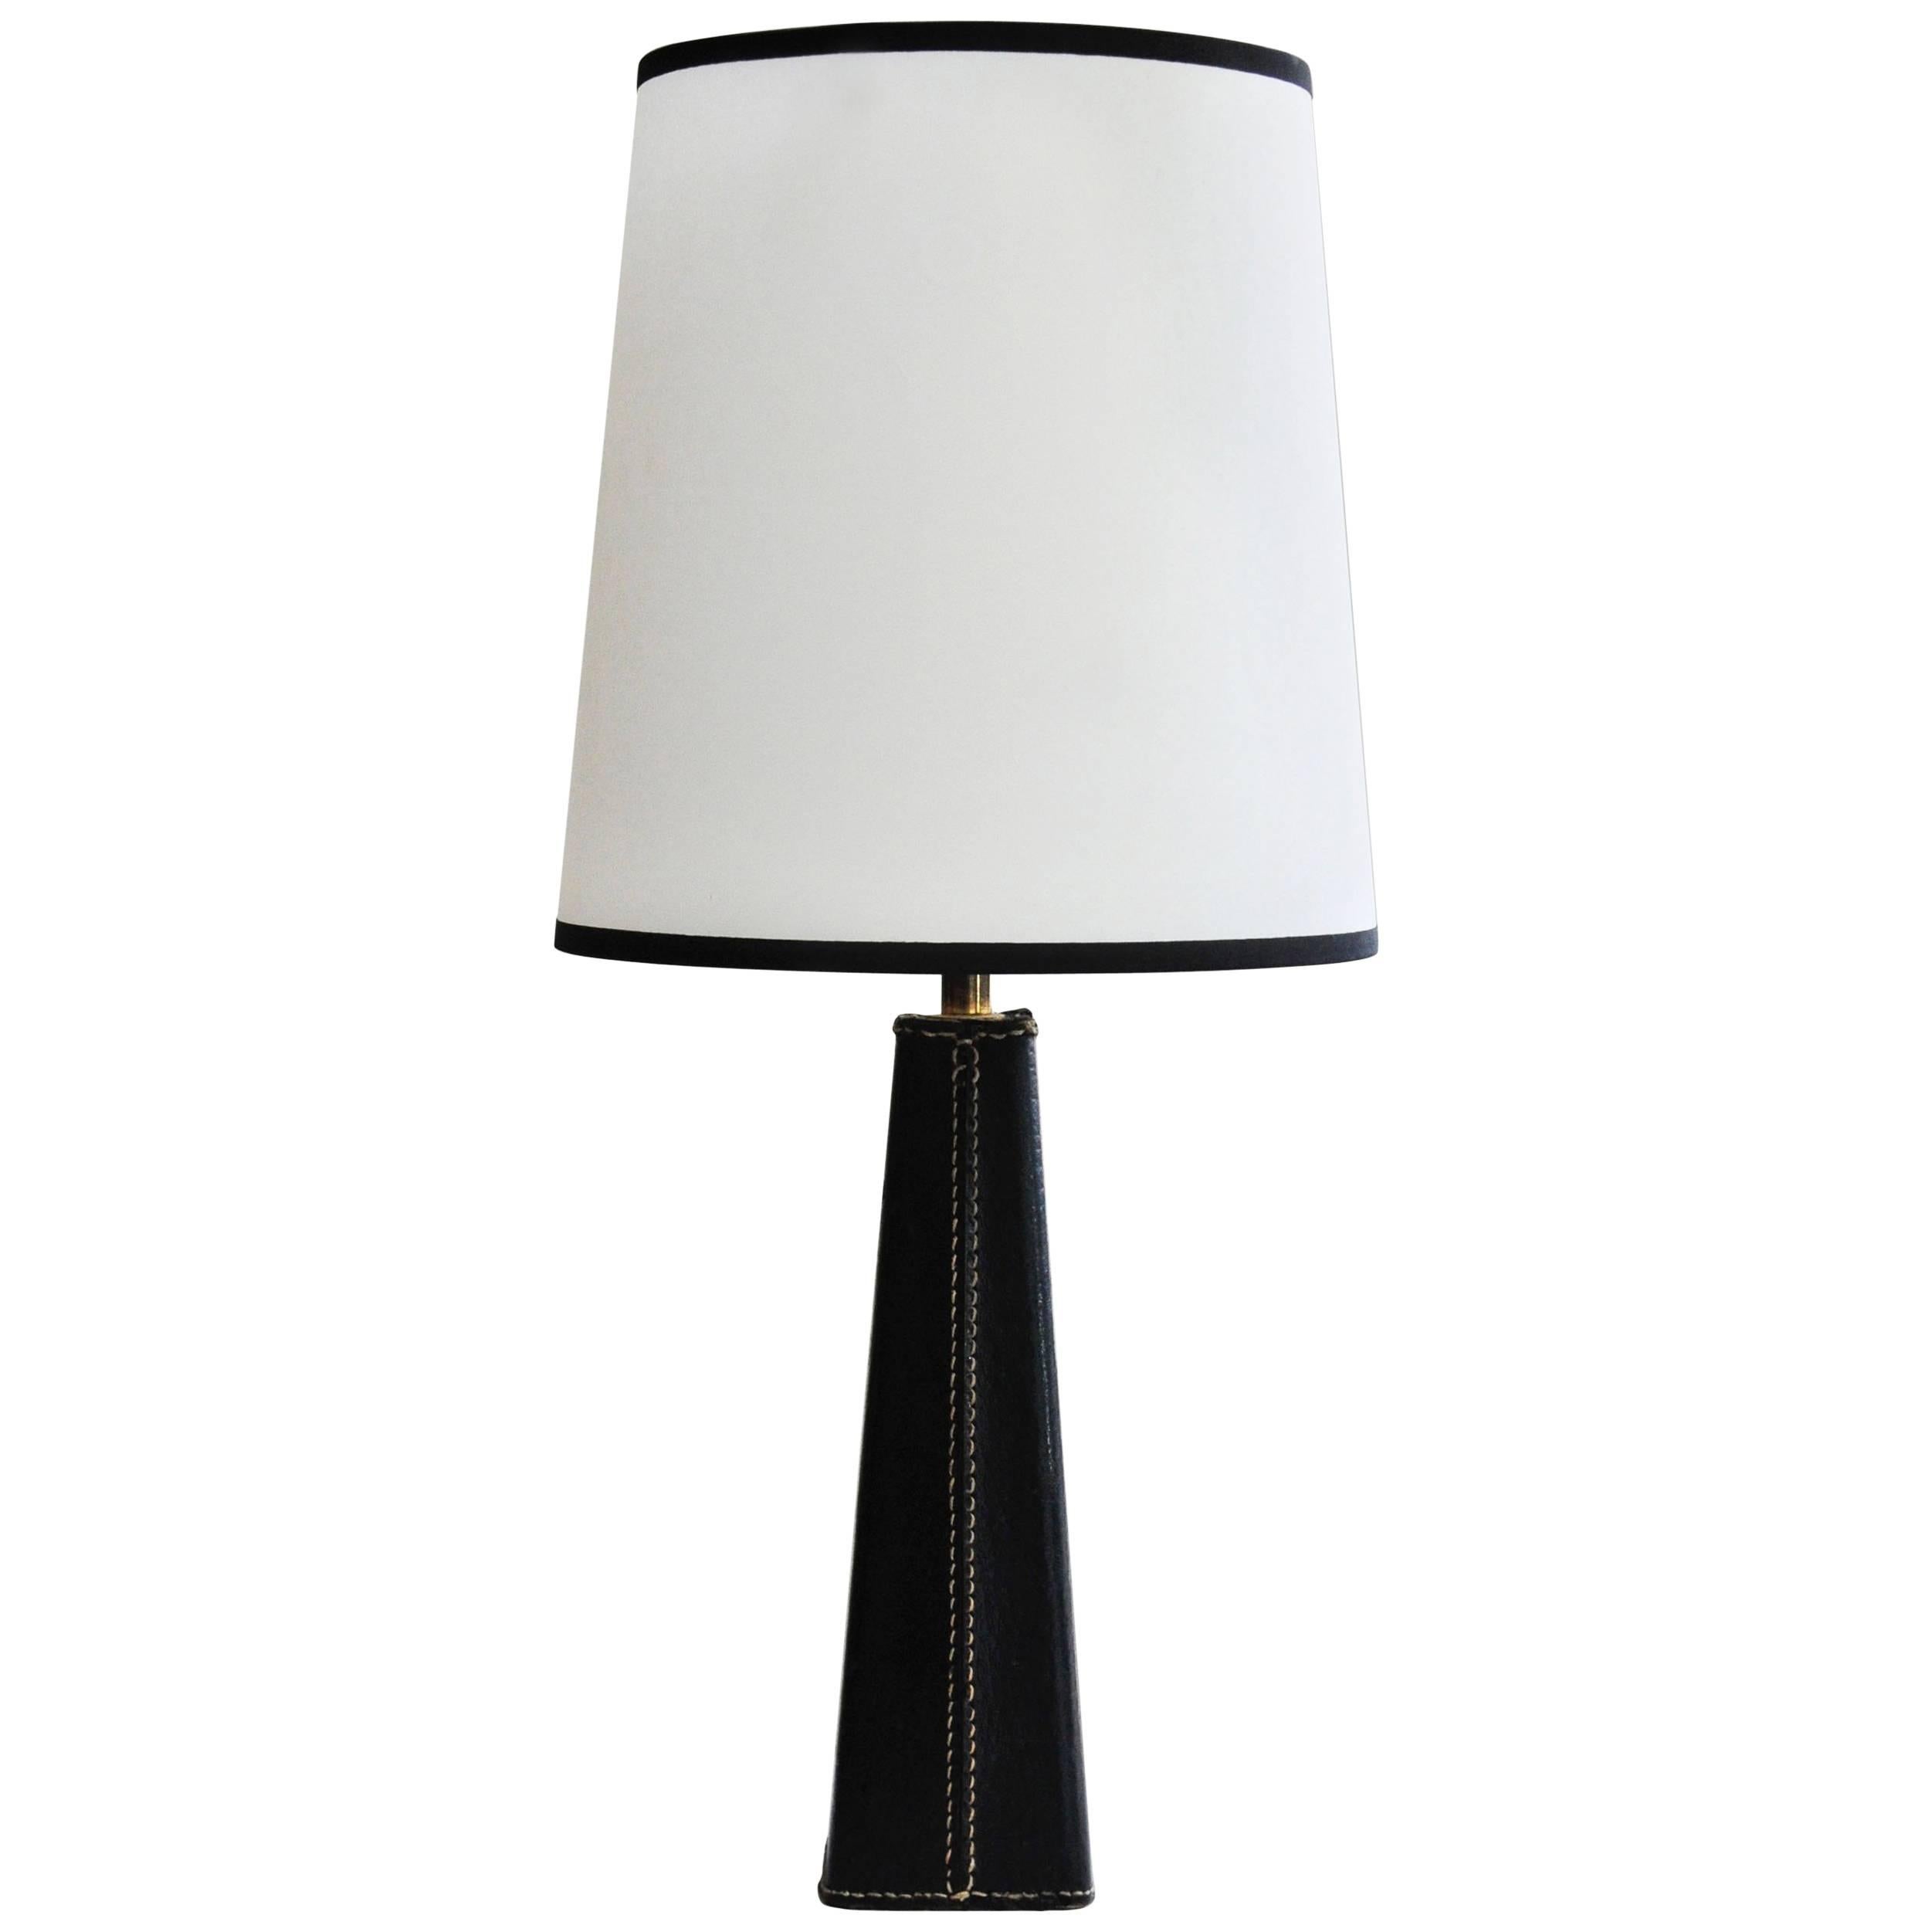 1950s French Stitched Leather Table Lamp